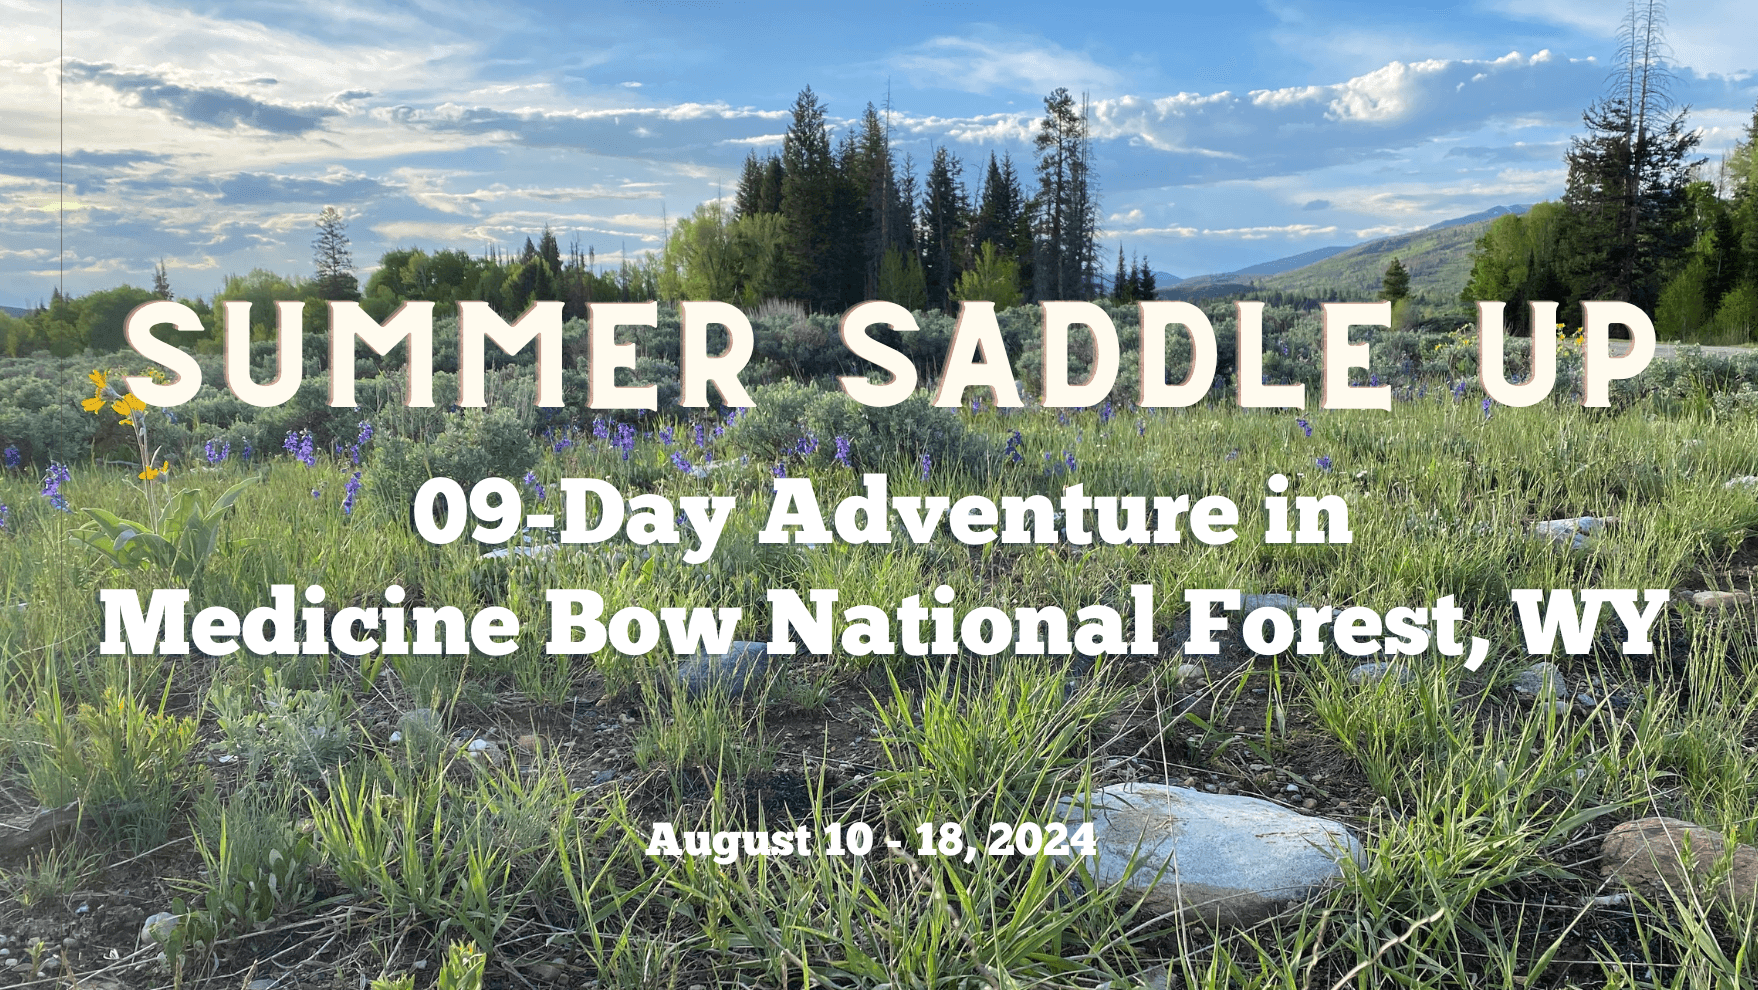 Summer Saddle Up: 09-Day Adventure in Medicine Bow National Forest, WY from August 10-18, 2024. Scenic landscape featuring a lush meadow with wildflowers, evergreen trees, and mountains under a partly cloudy sky.